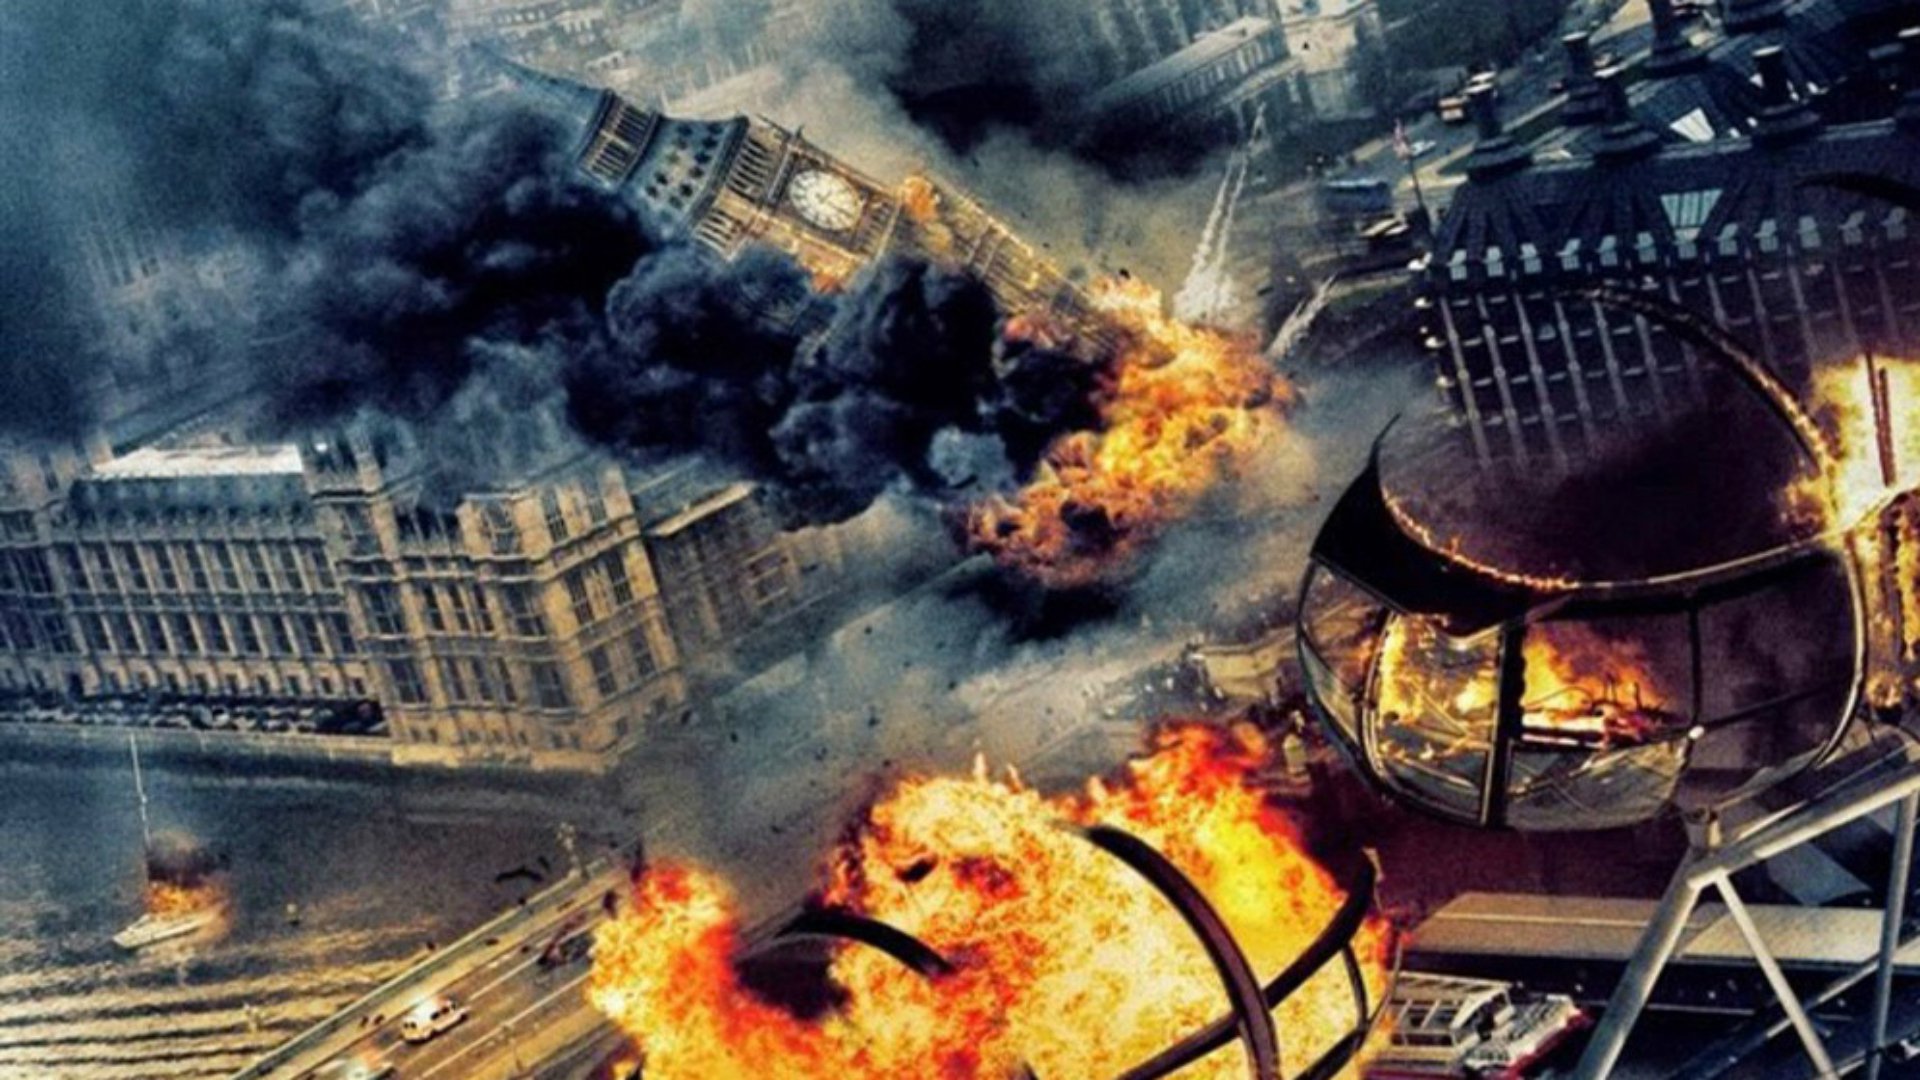 London Has Fallen Wallpaper HD Background Of Your Choice